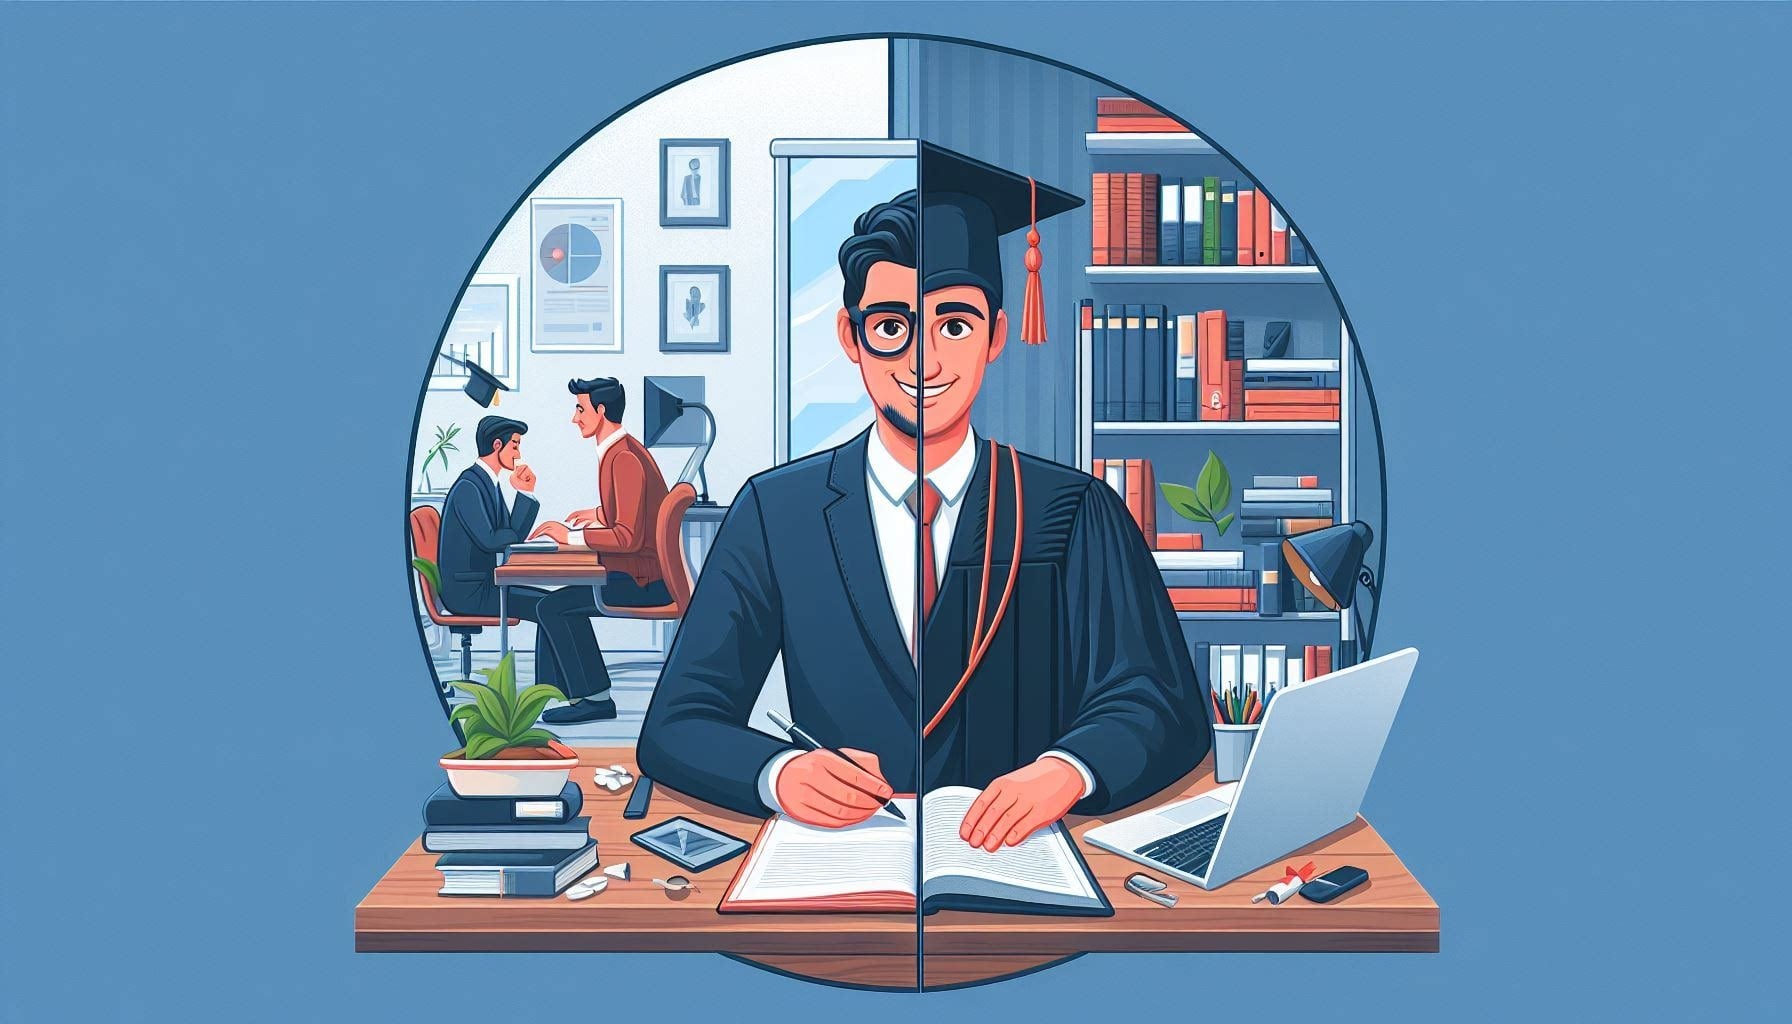 On one side, you’ll see the professional diligently working in their office, and on the other, the same individual is depicted wearing a graduation hat, deeply engaged in their PhD project. This dual scene perfectly encapsulates the duality of a part time PhD journey, balancing professional duties with academic aspirations.